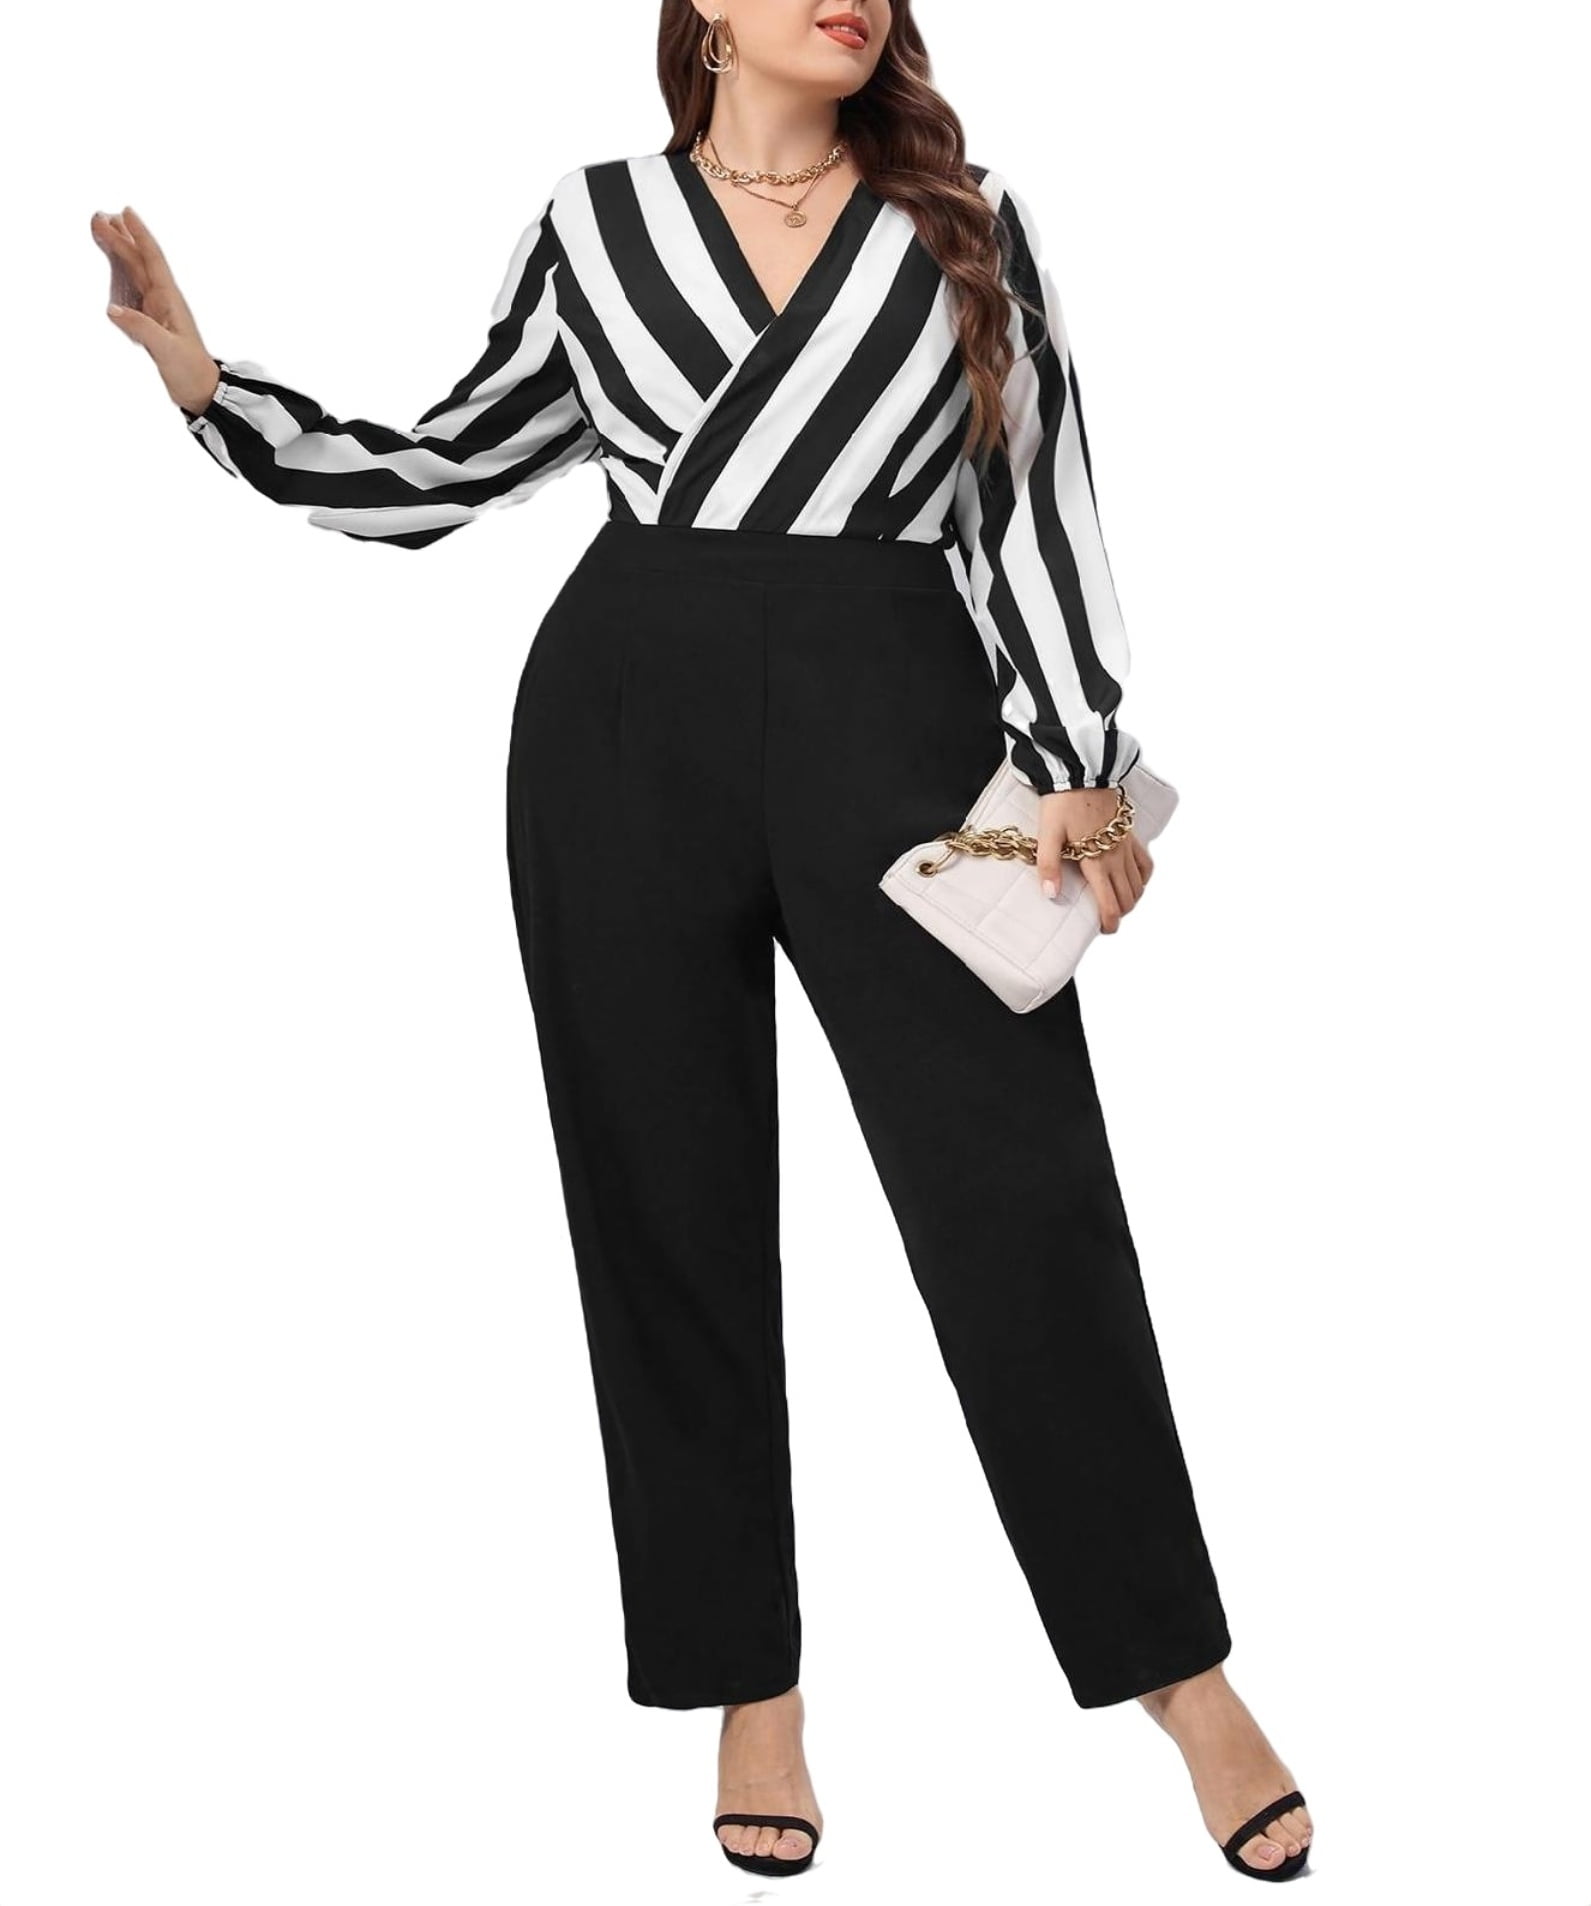 Striped Sweatshirt And Legging Jumpsuit Set For Women Plus Size, Long  Sleeve, Casual Sportswear For Fall And Winter 3623 From Earthcn, $35.68